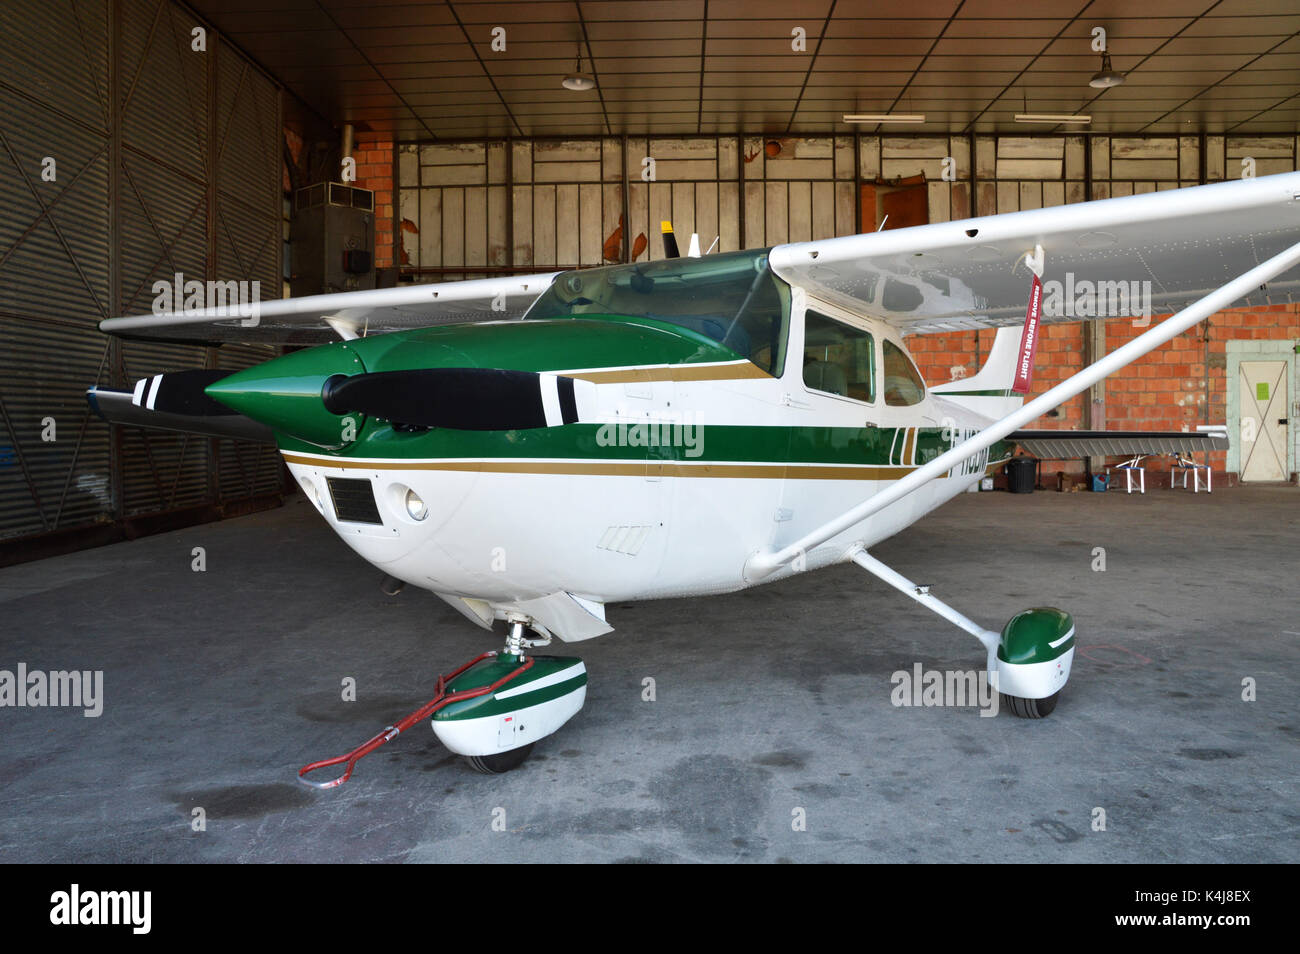 A small plane, parked in hangar airplane. Stock Photo